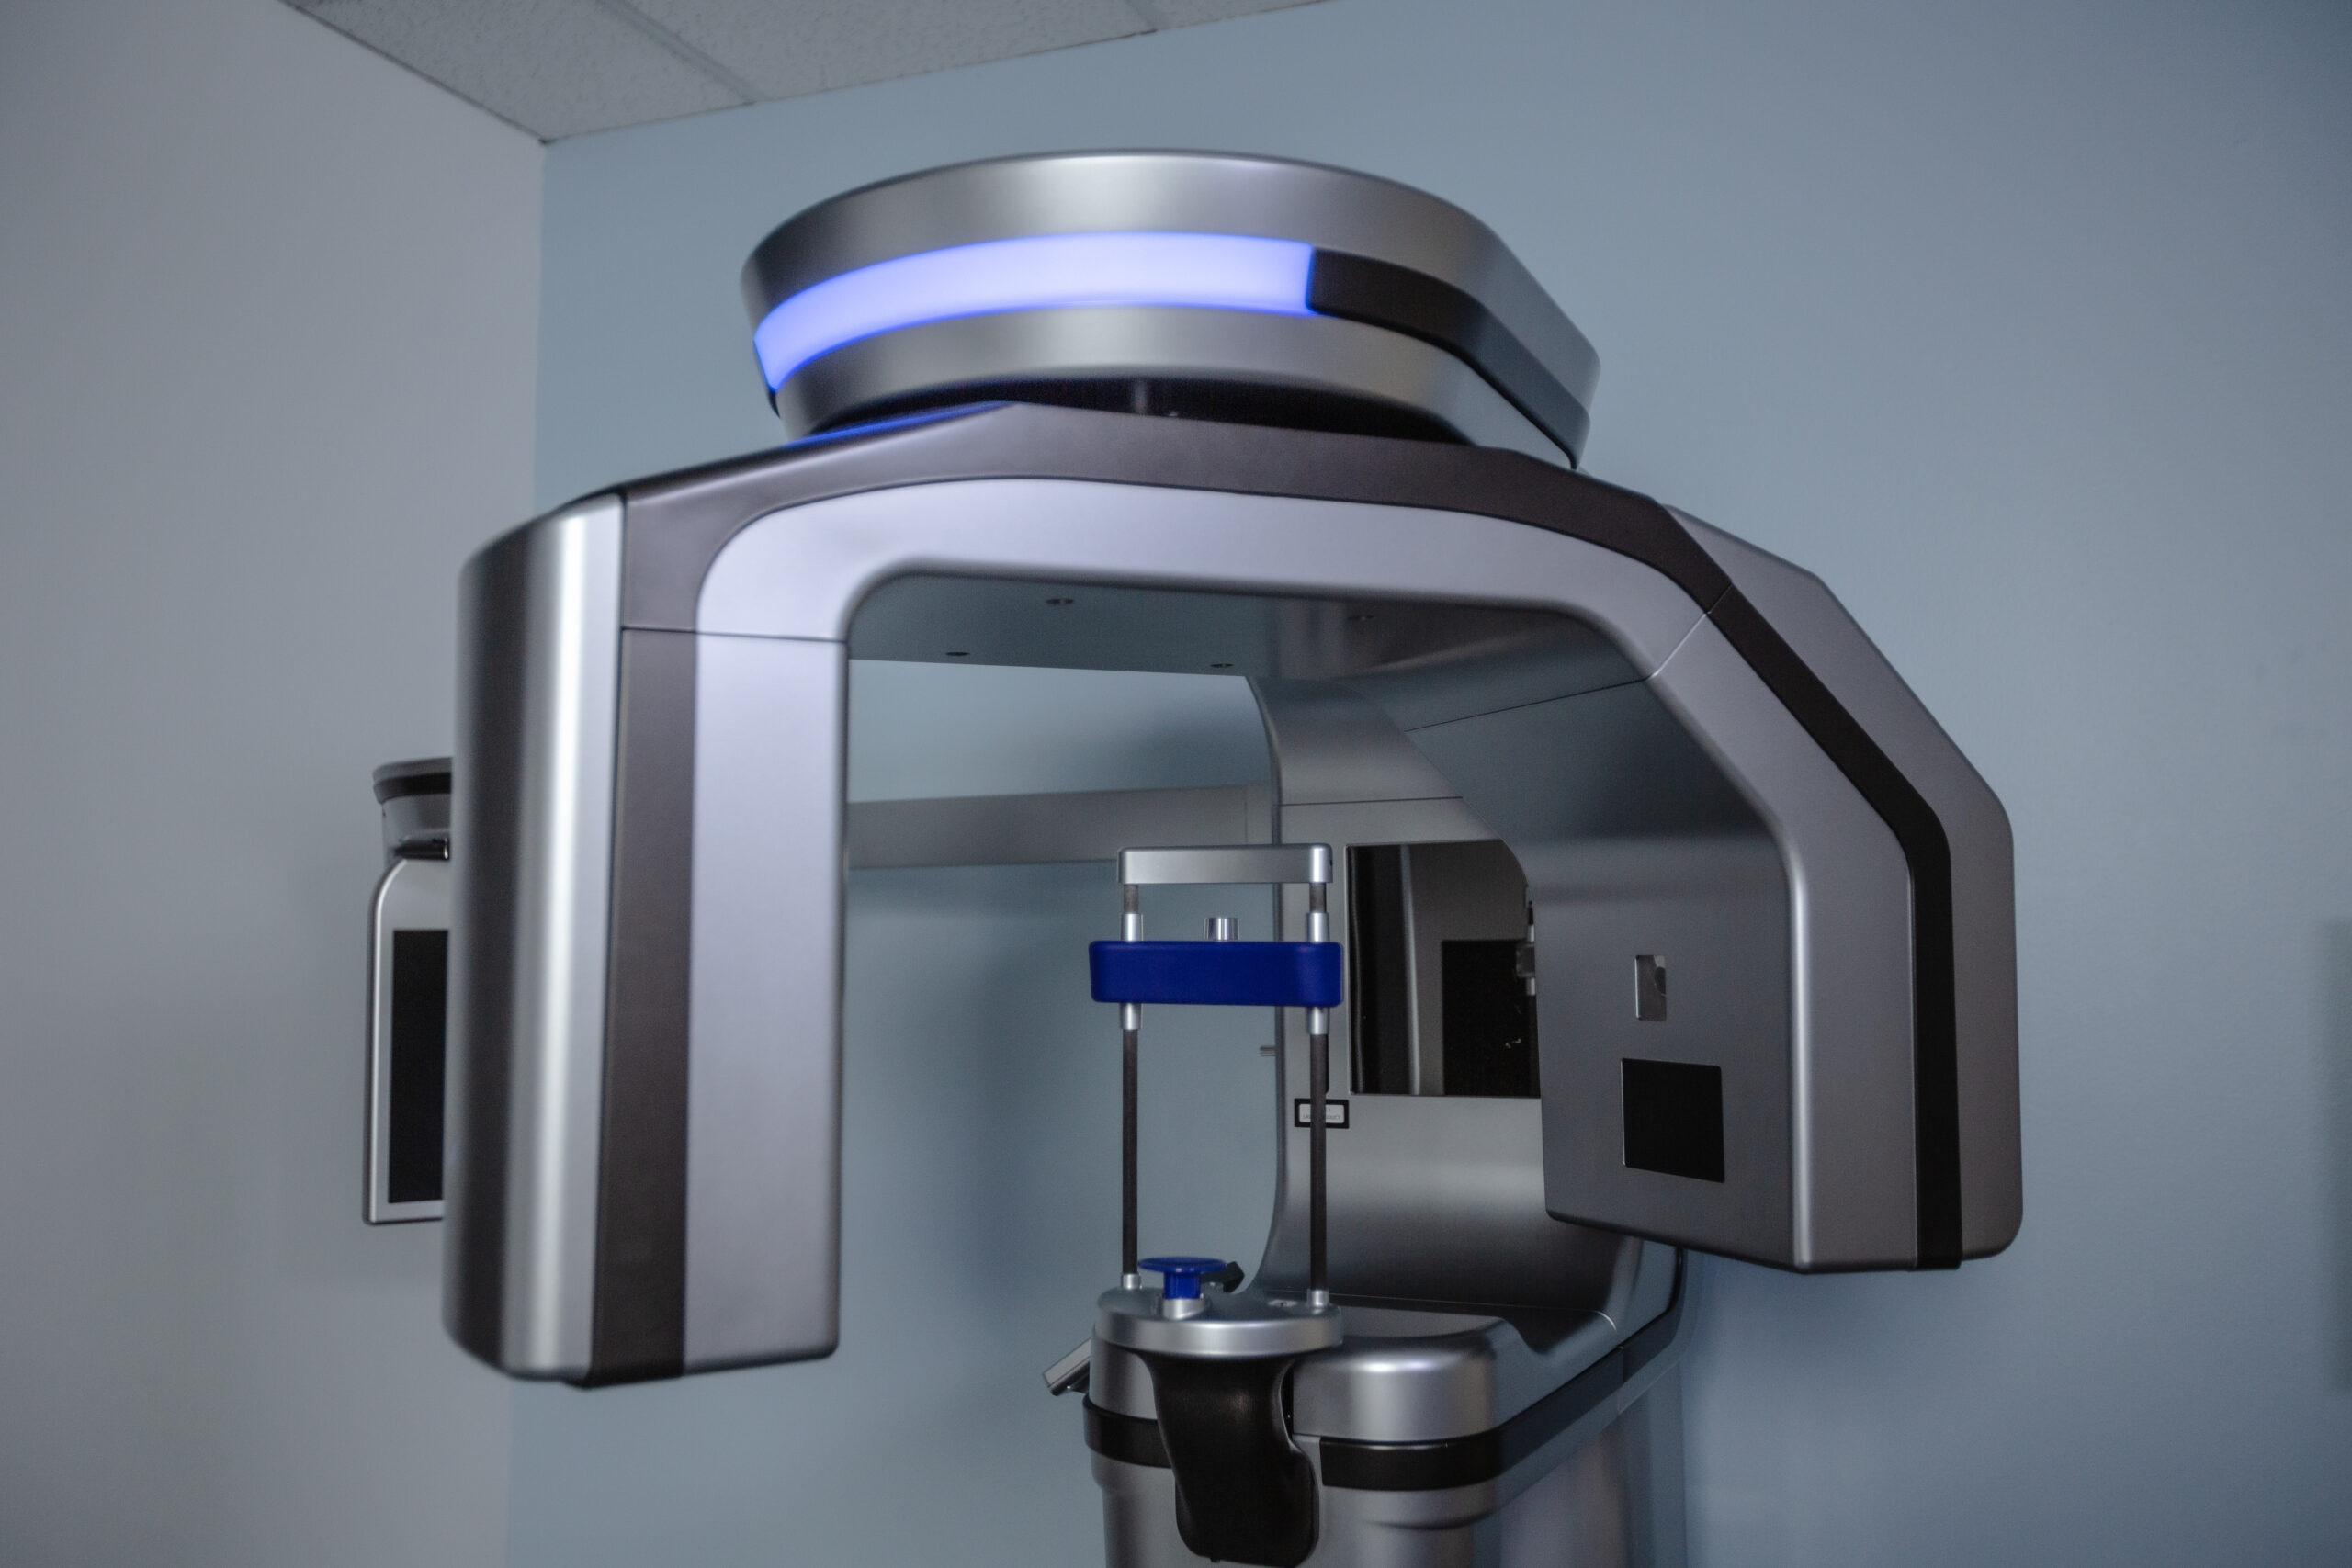 Cone beam computed tomography